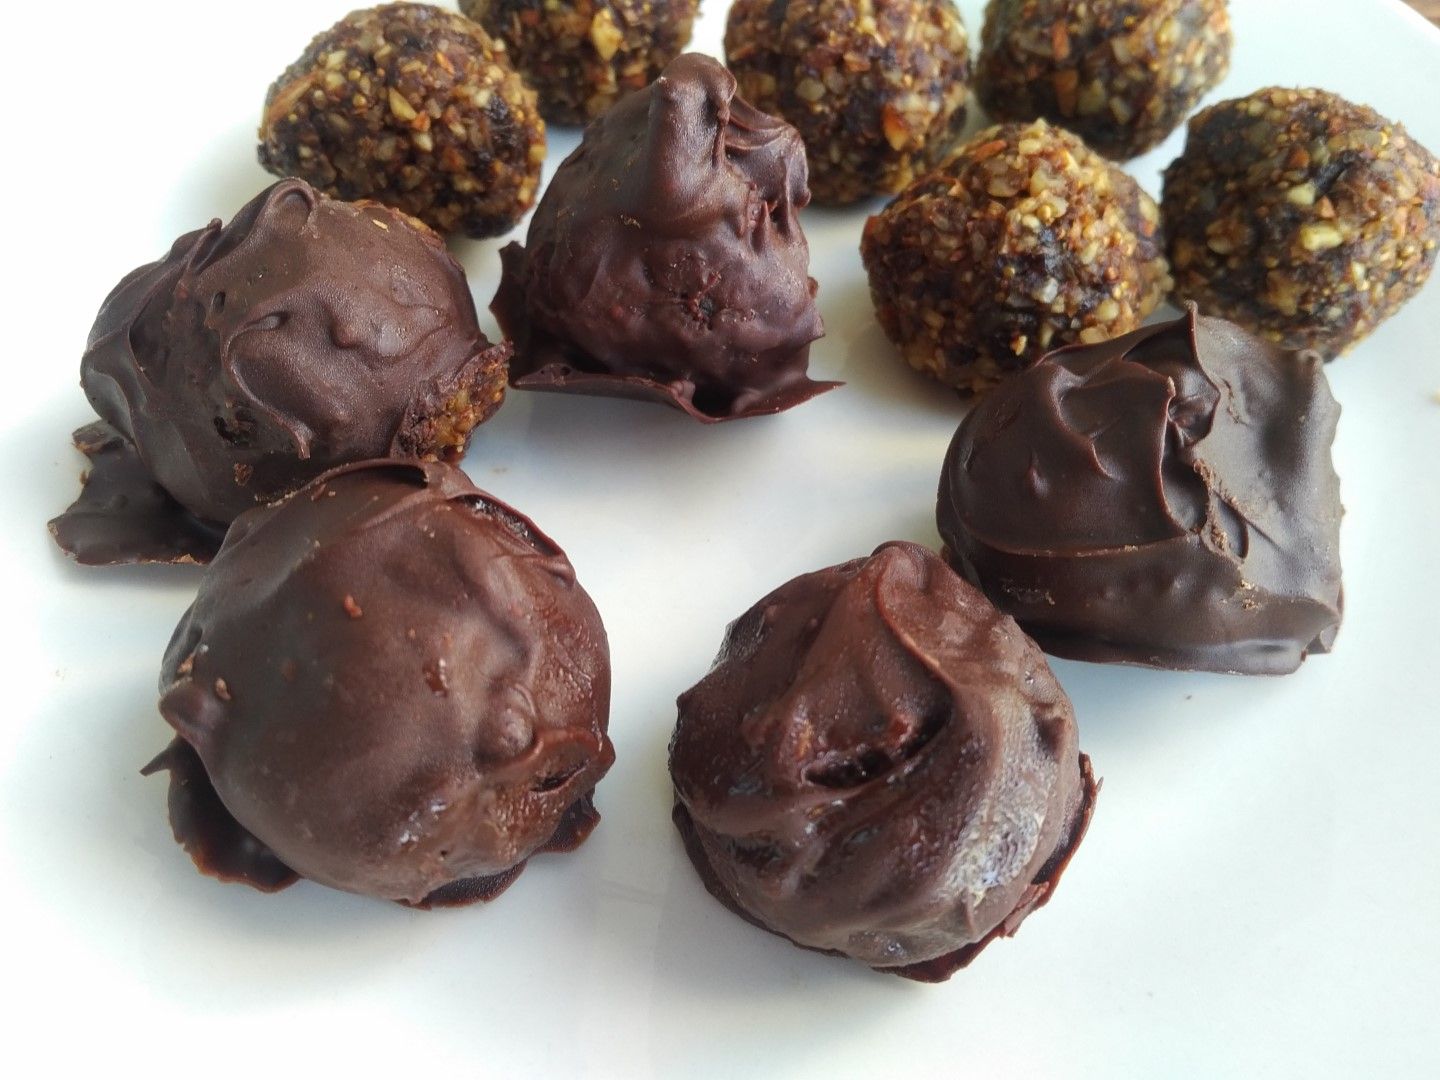 Dried fig and almond power balls – Just 3 ingredients